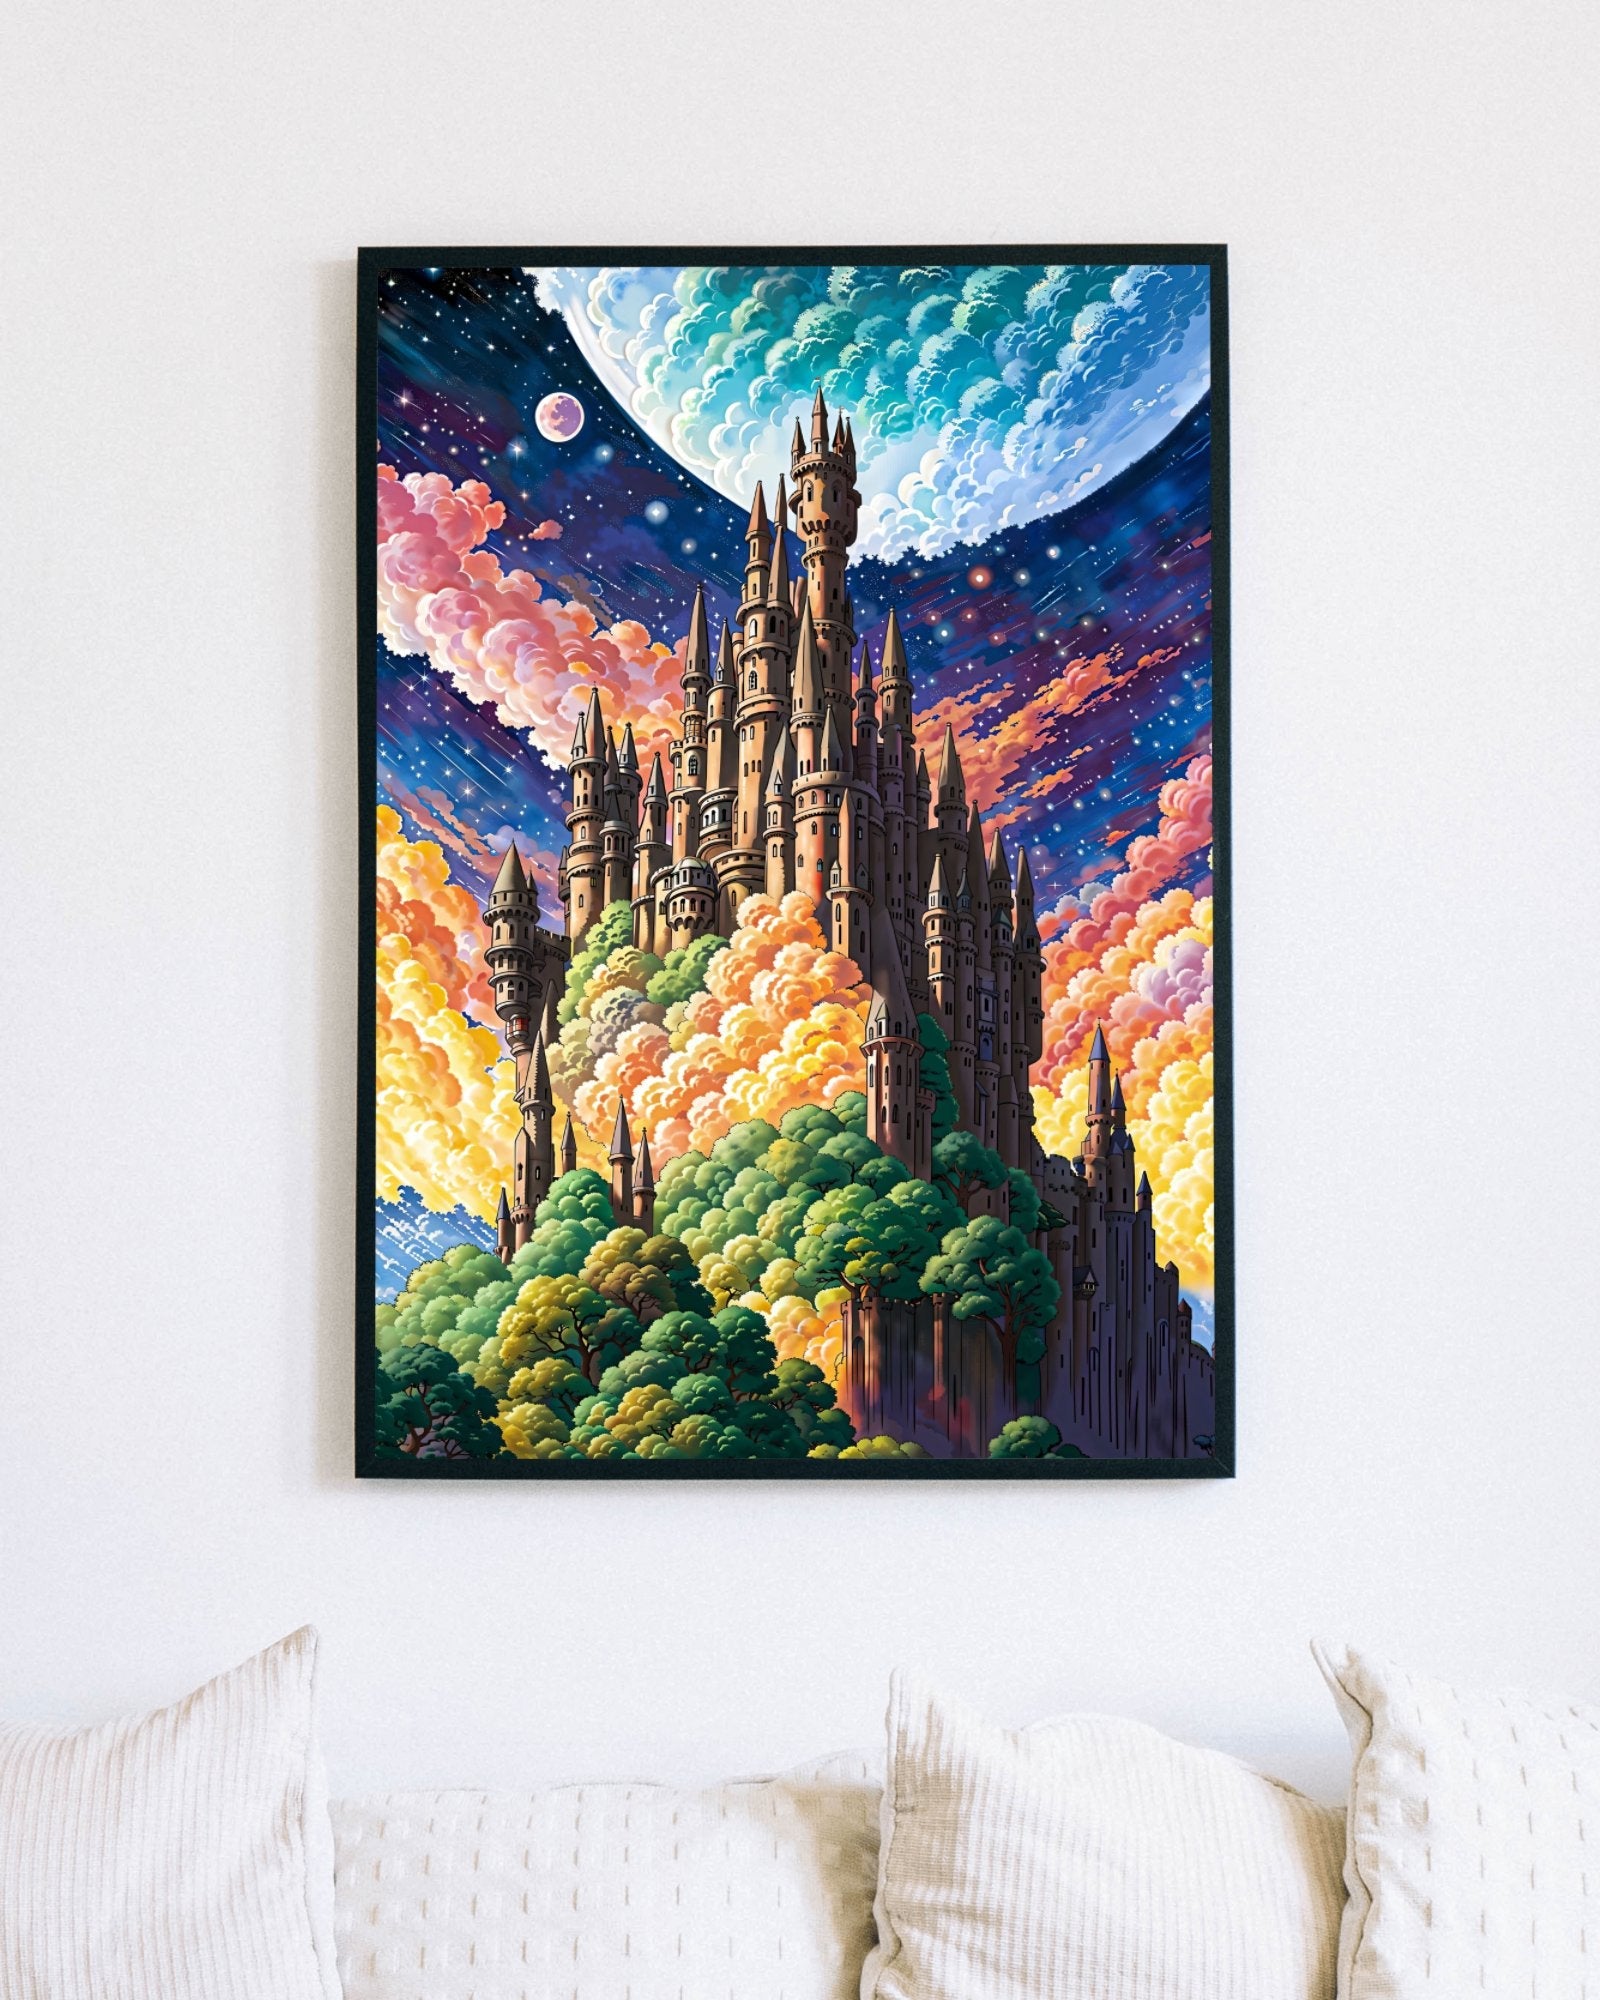 Dream stronghold - Poster - Ever colorful